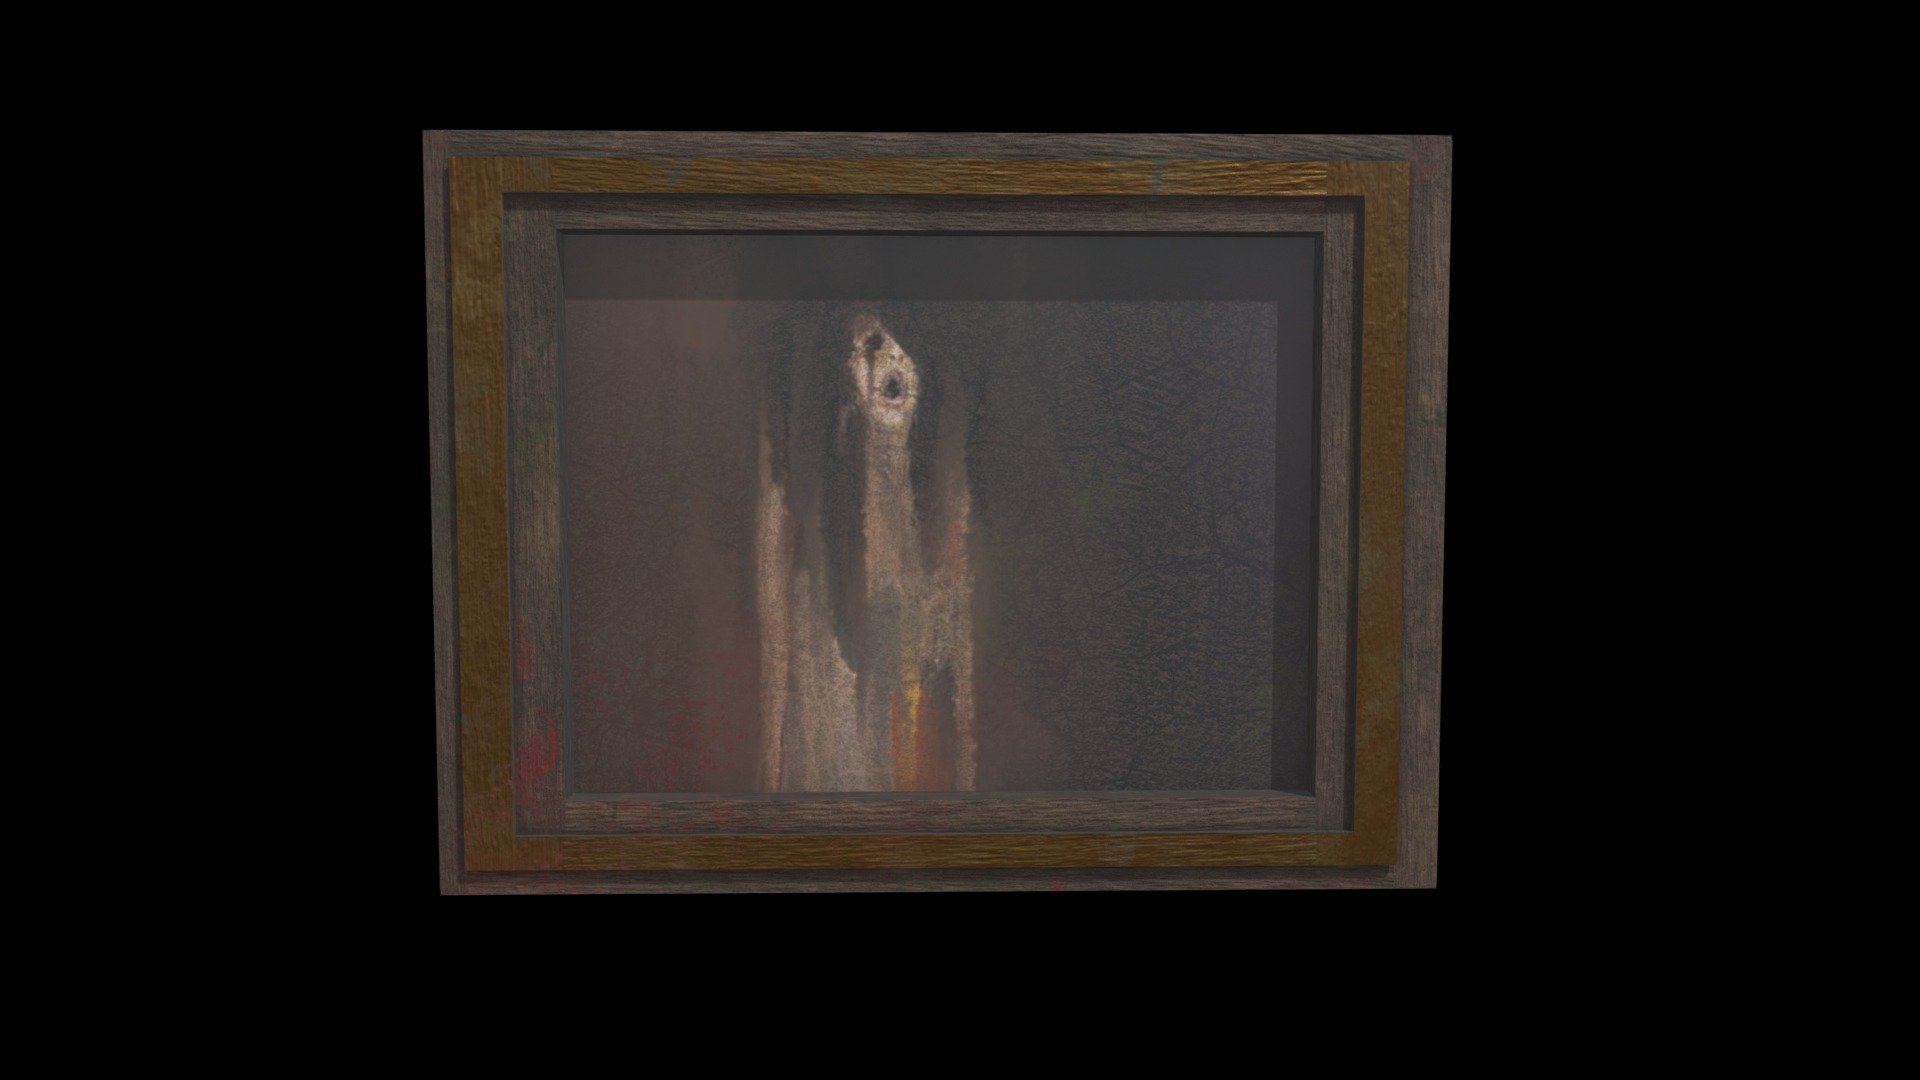 I’ve been working on a game with my team (Cotton Cloud Productions) called The Chopping Block. It is a horror theme and we wanted to have some distinctive rooms within the level, I thought a creepy painting would help add to the spookiness of the game (especially since it will disappear and reappear in another room with creepy laughter). I created the model, UV's, and texture art. This is one of my favorite pieces I've done so far. I painted the image in Photoshop and used Substance Painter to add the grime and other textures you see on the painting and frame 3d model